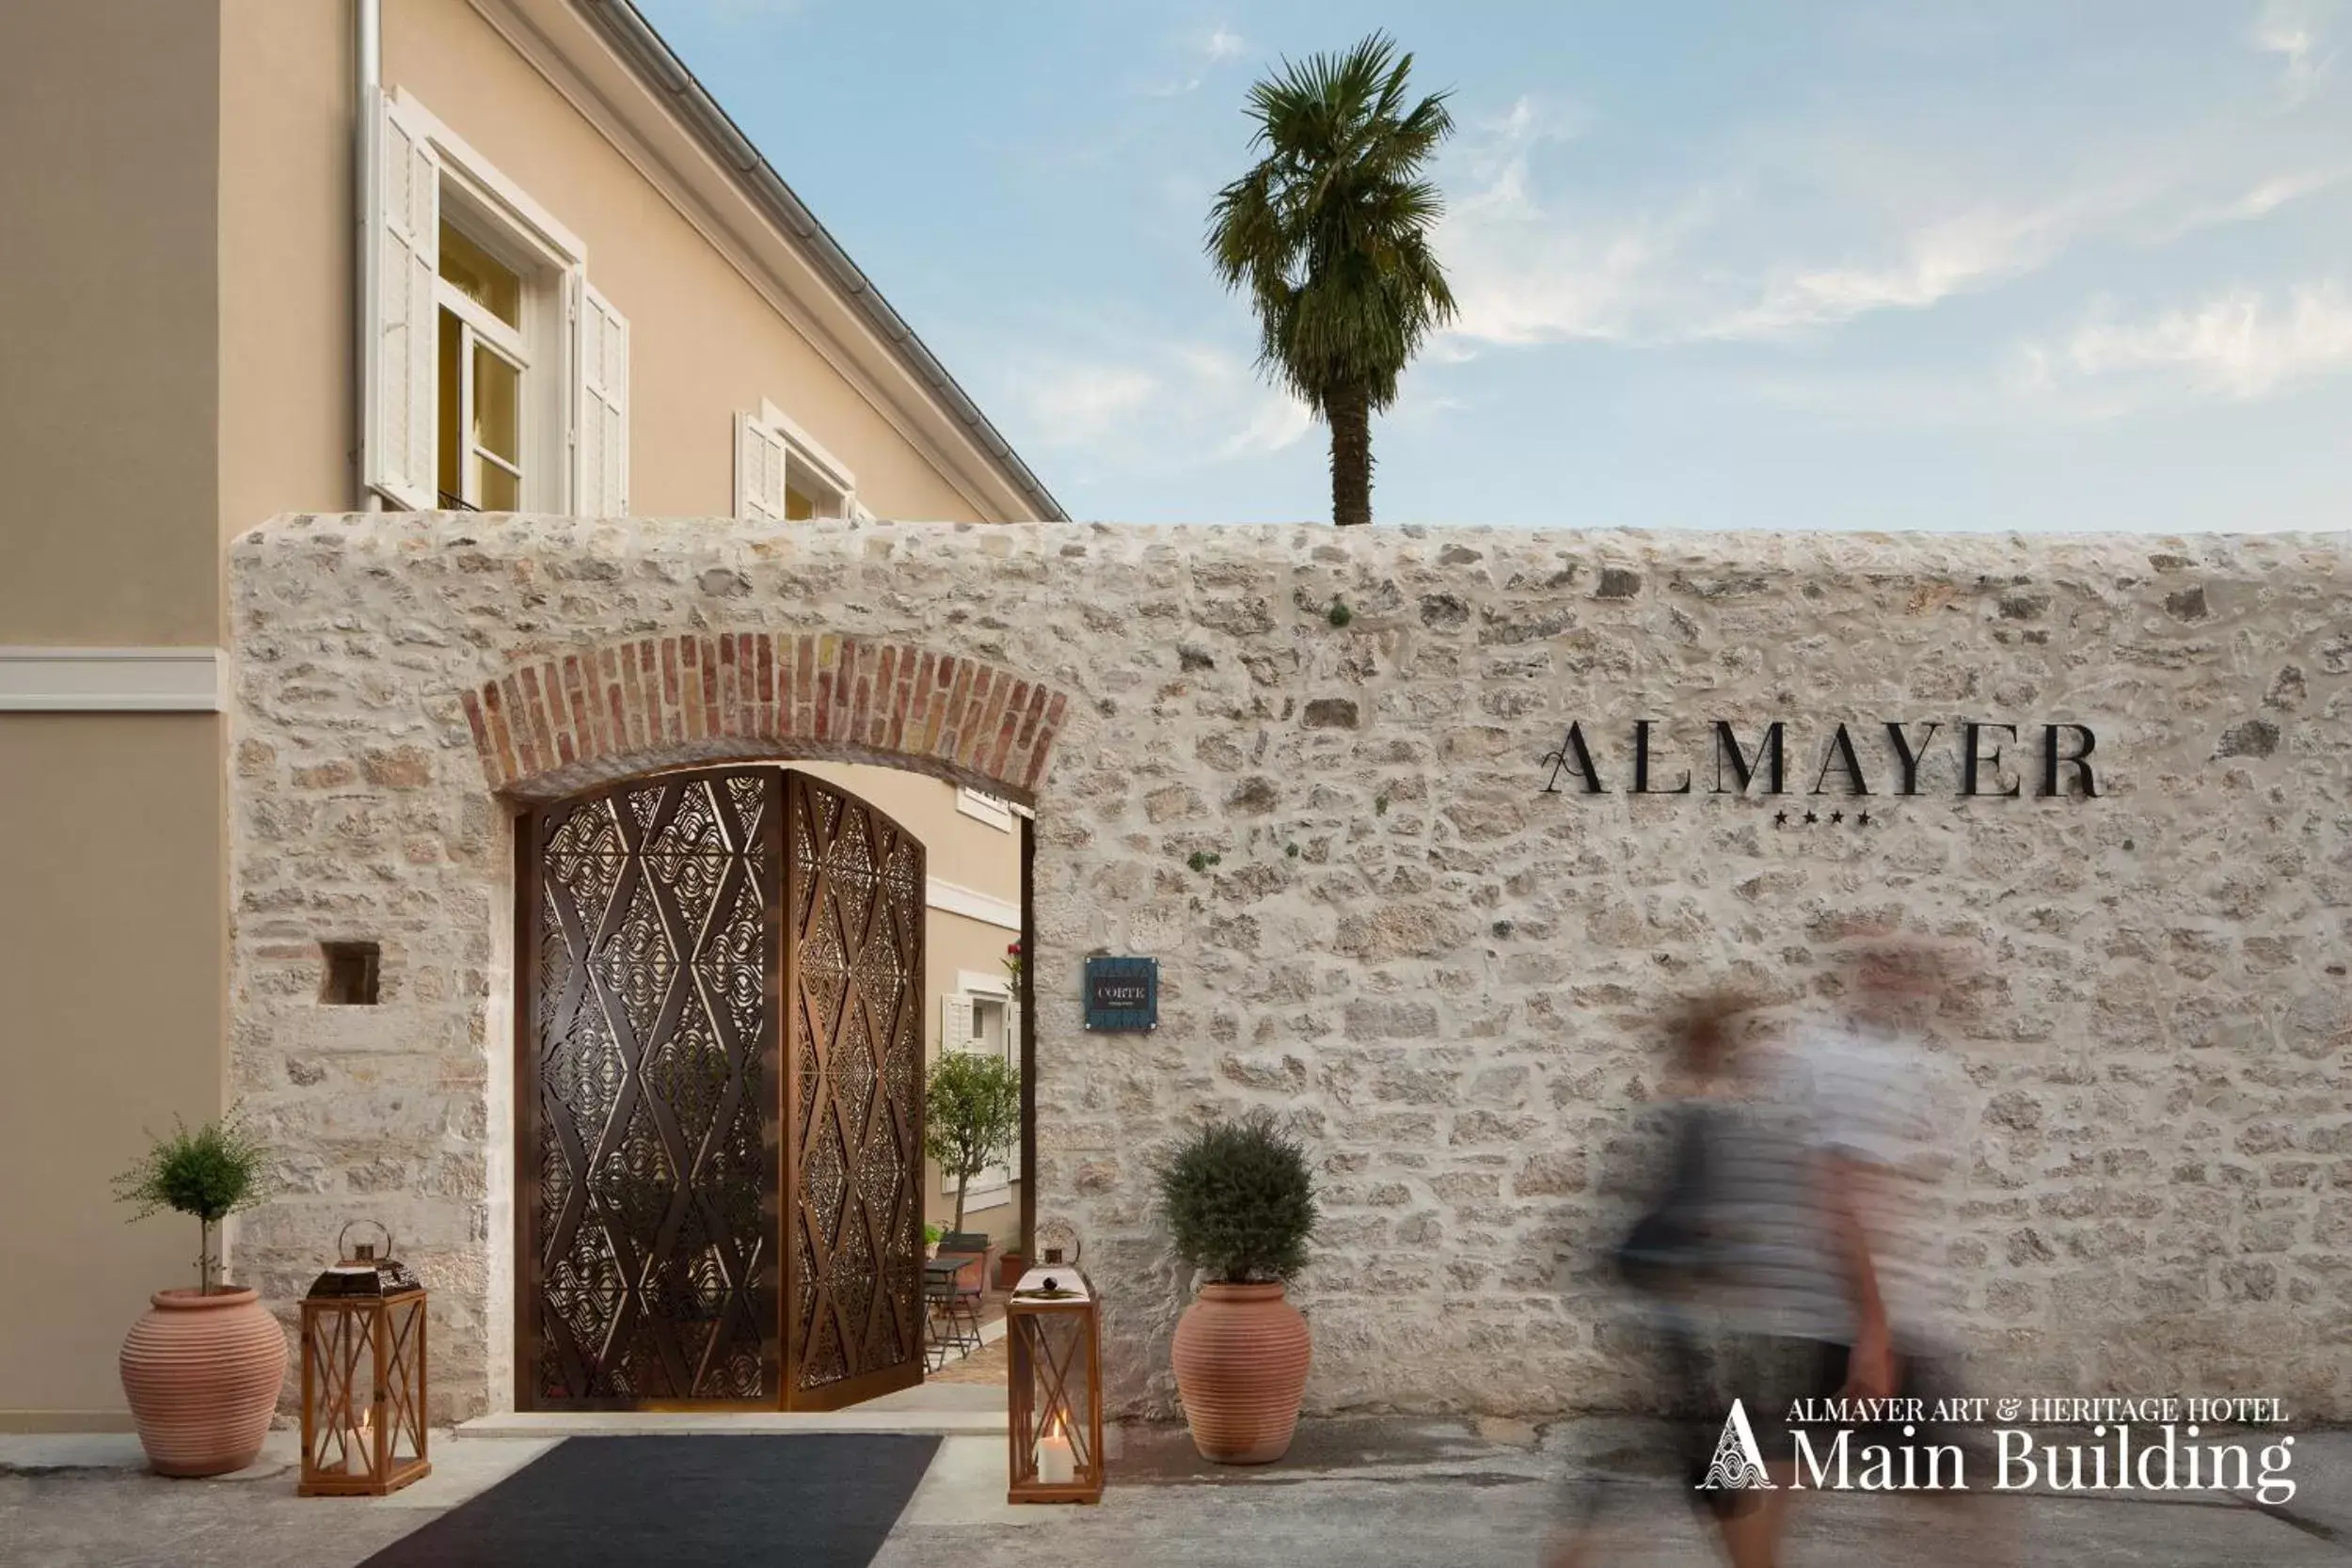 Property building in Almayer Art & Heritage Hotel and Dépendance